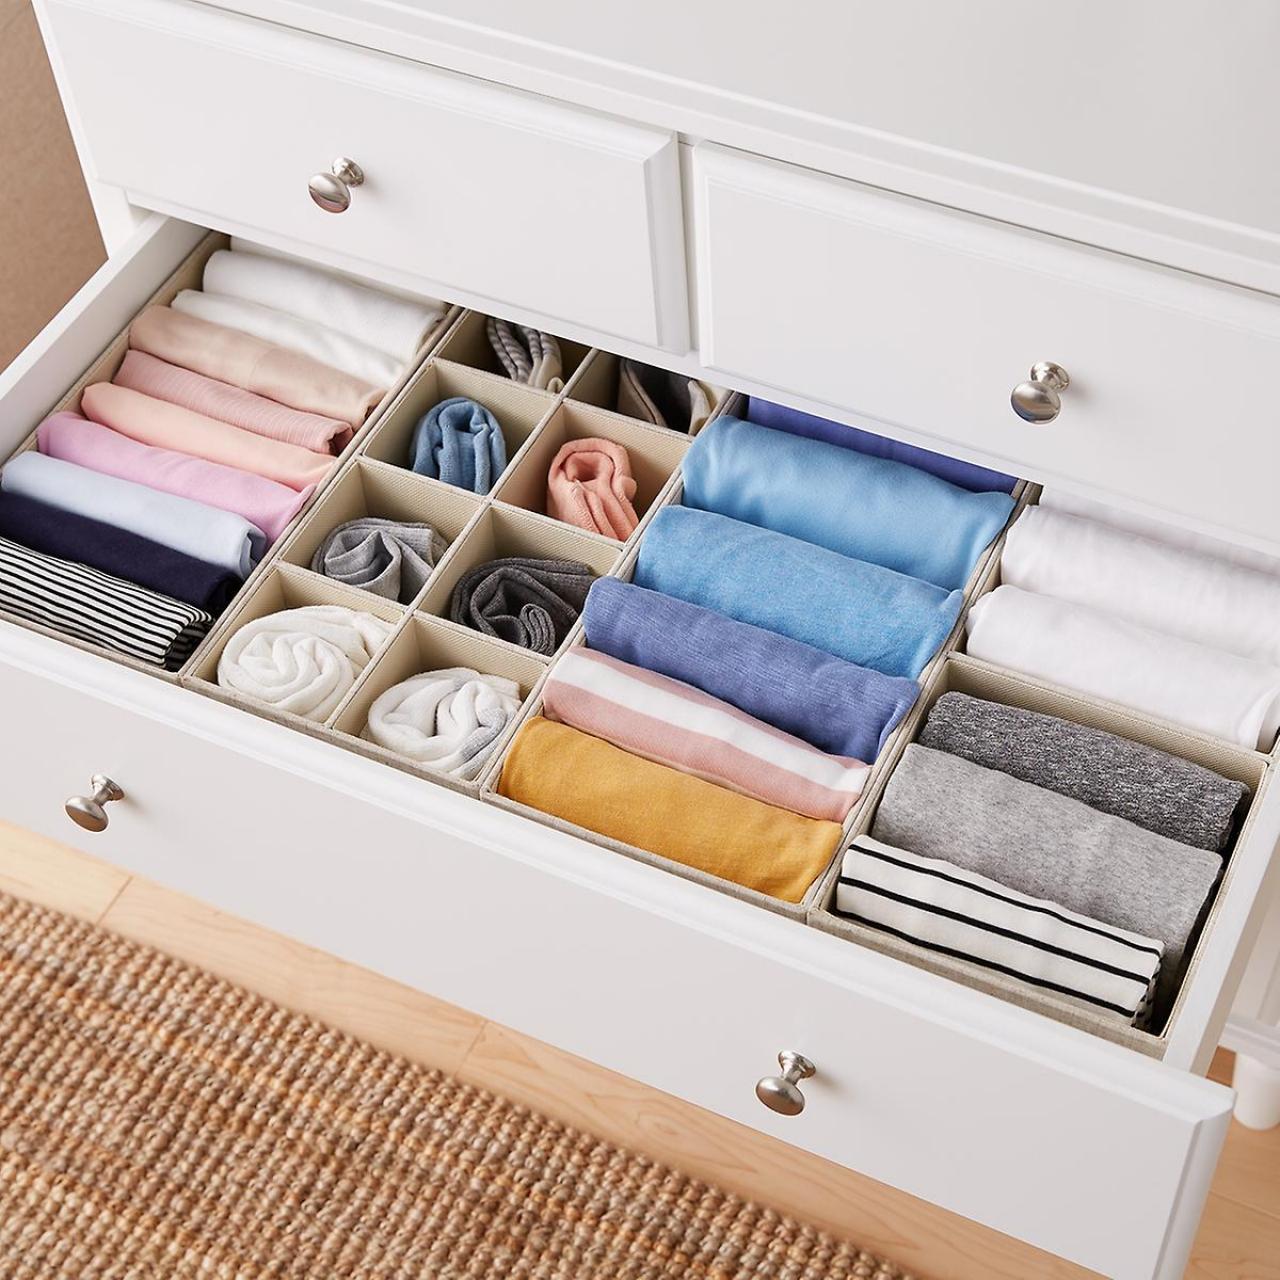 Organizing a dresser: 10 ways to sort drawers in style